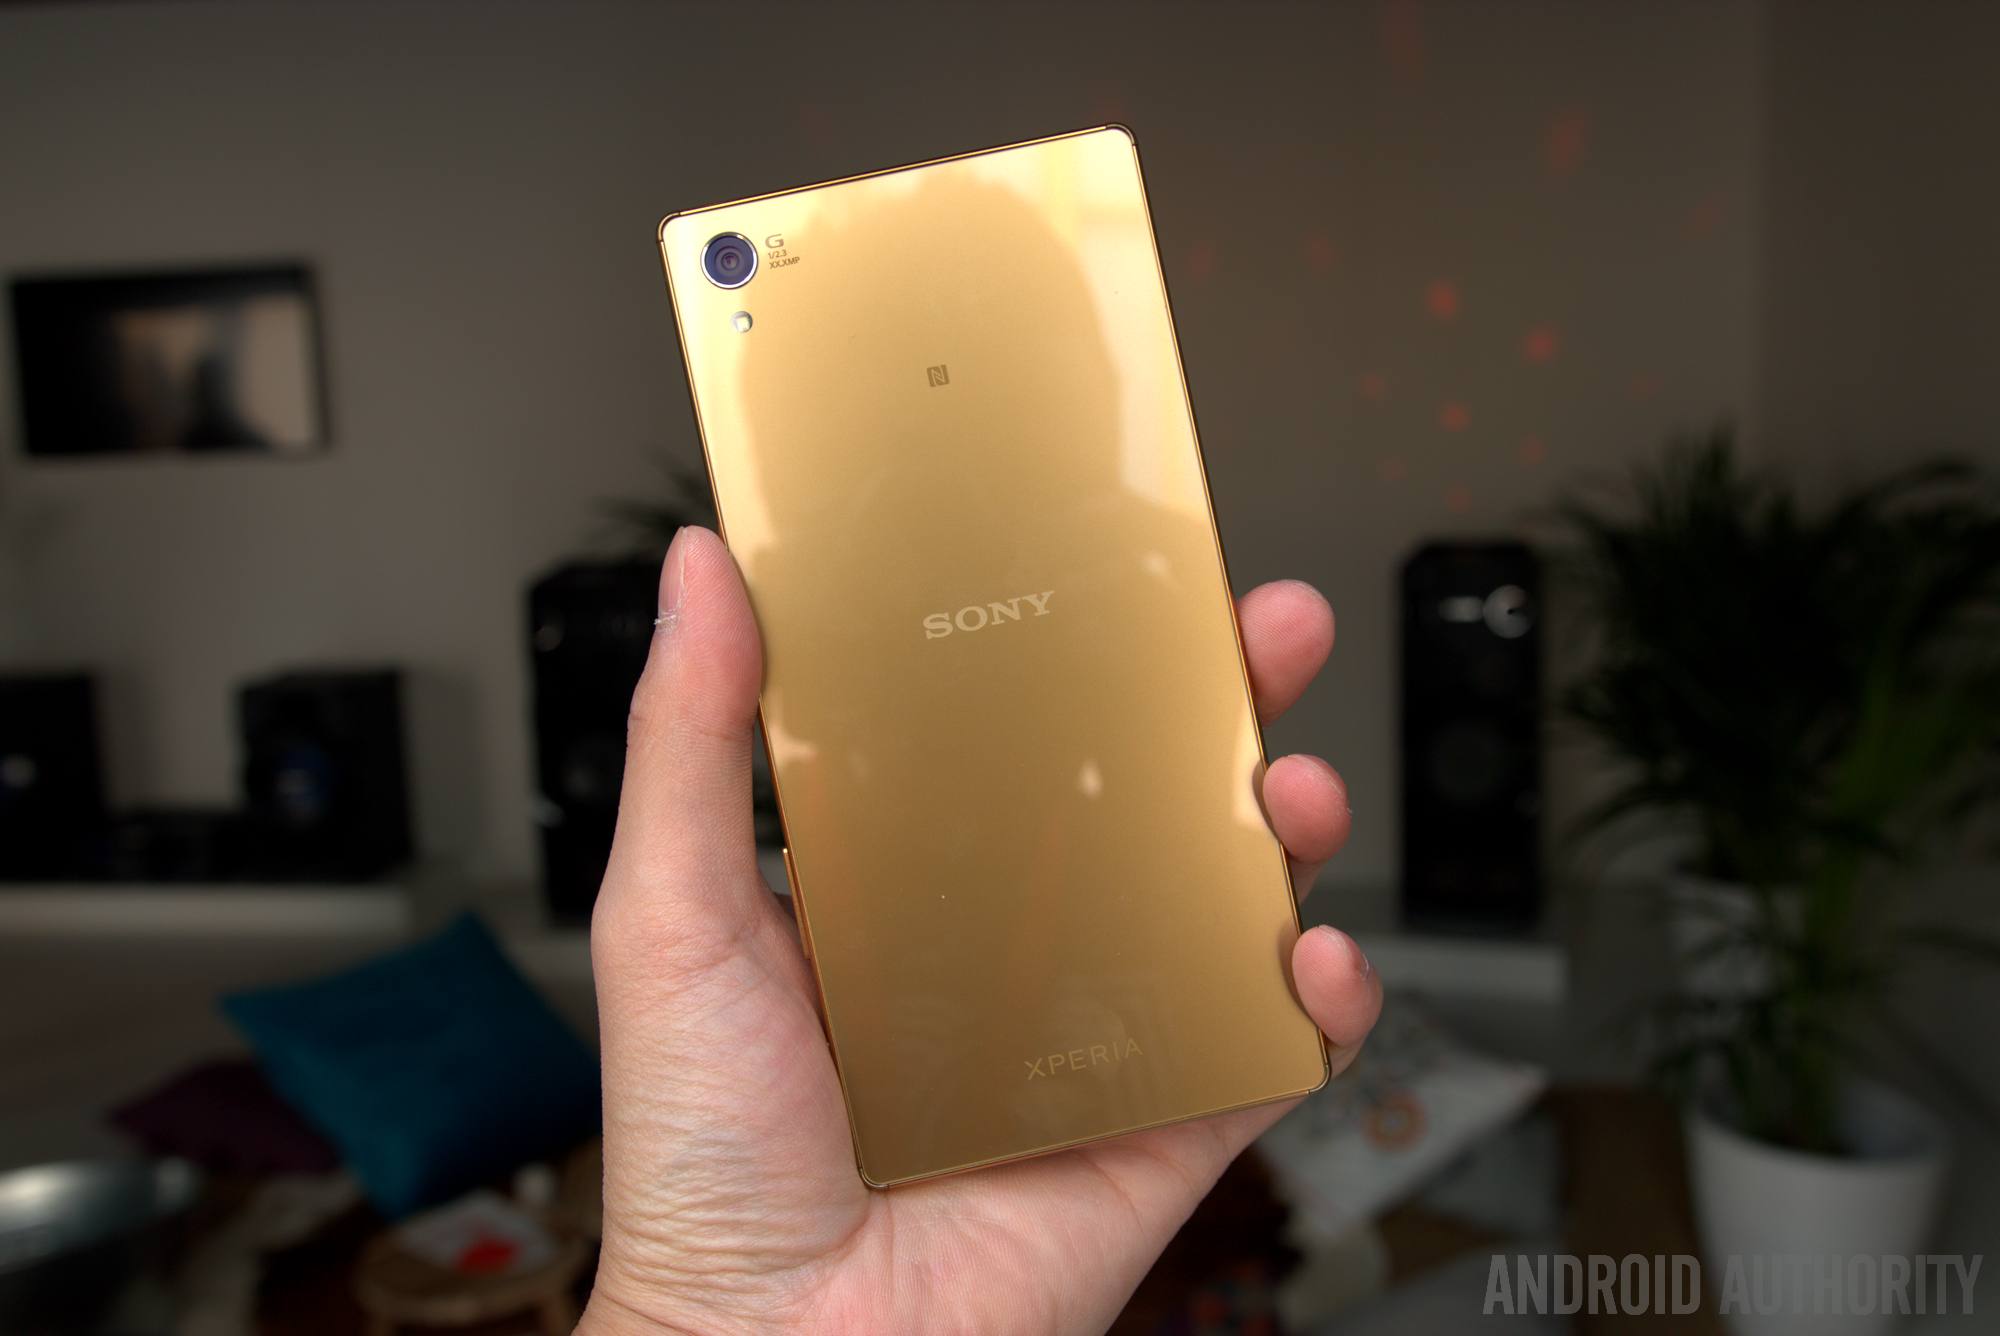 Sony Xperia Z5 Premium and look